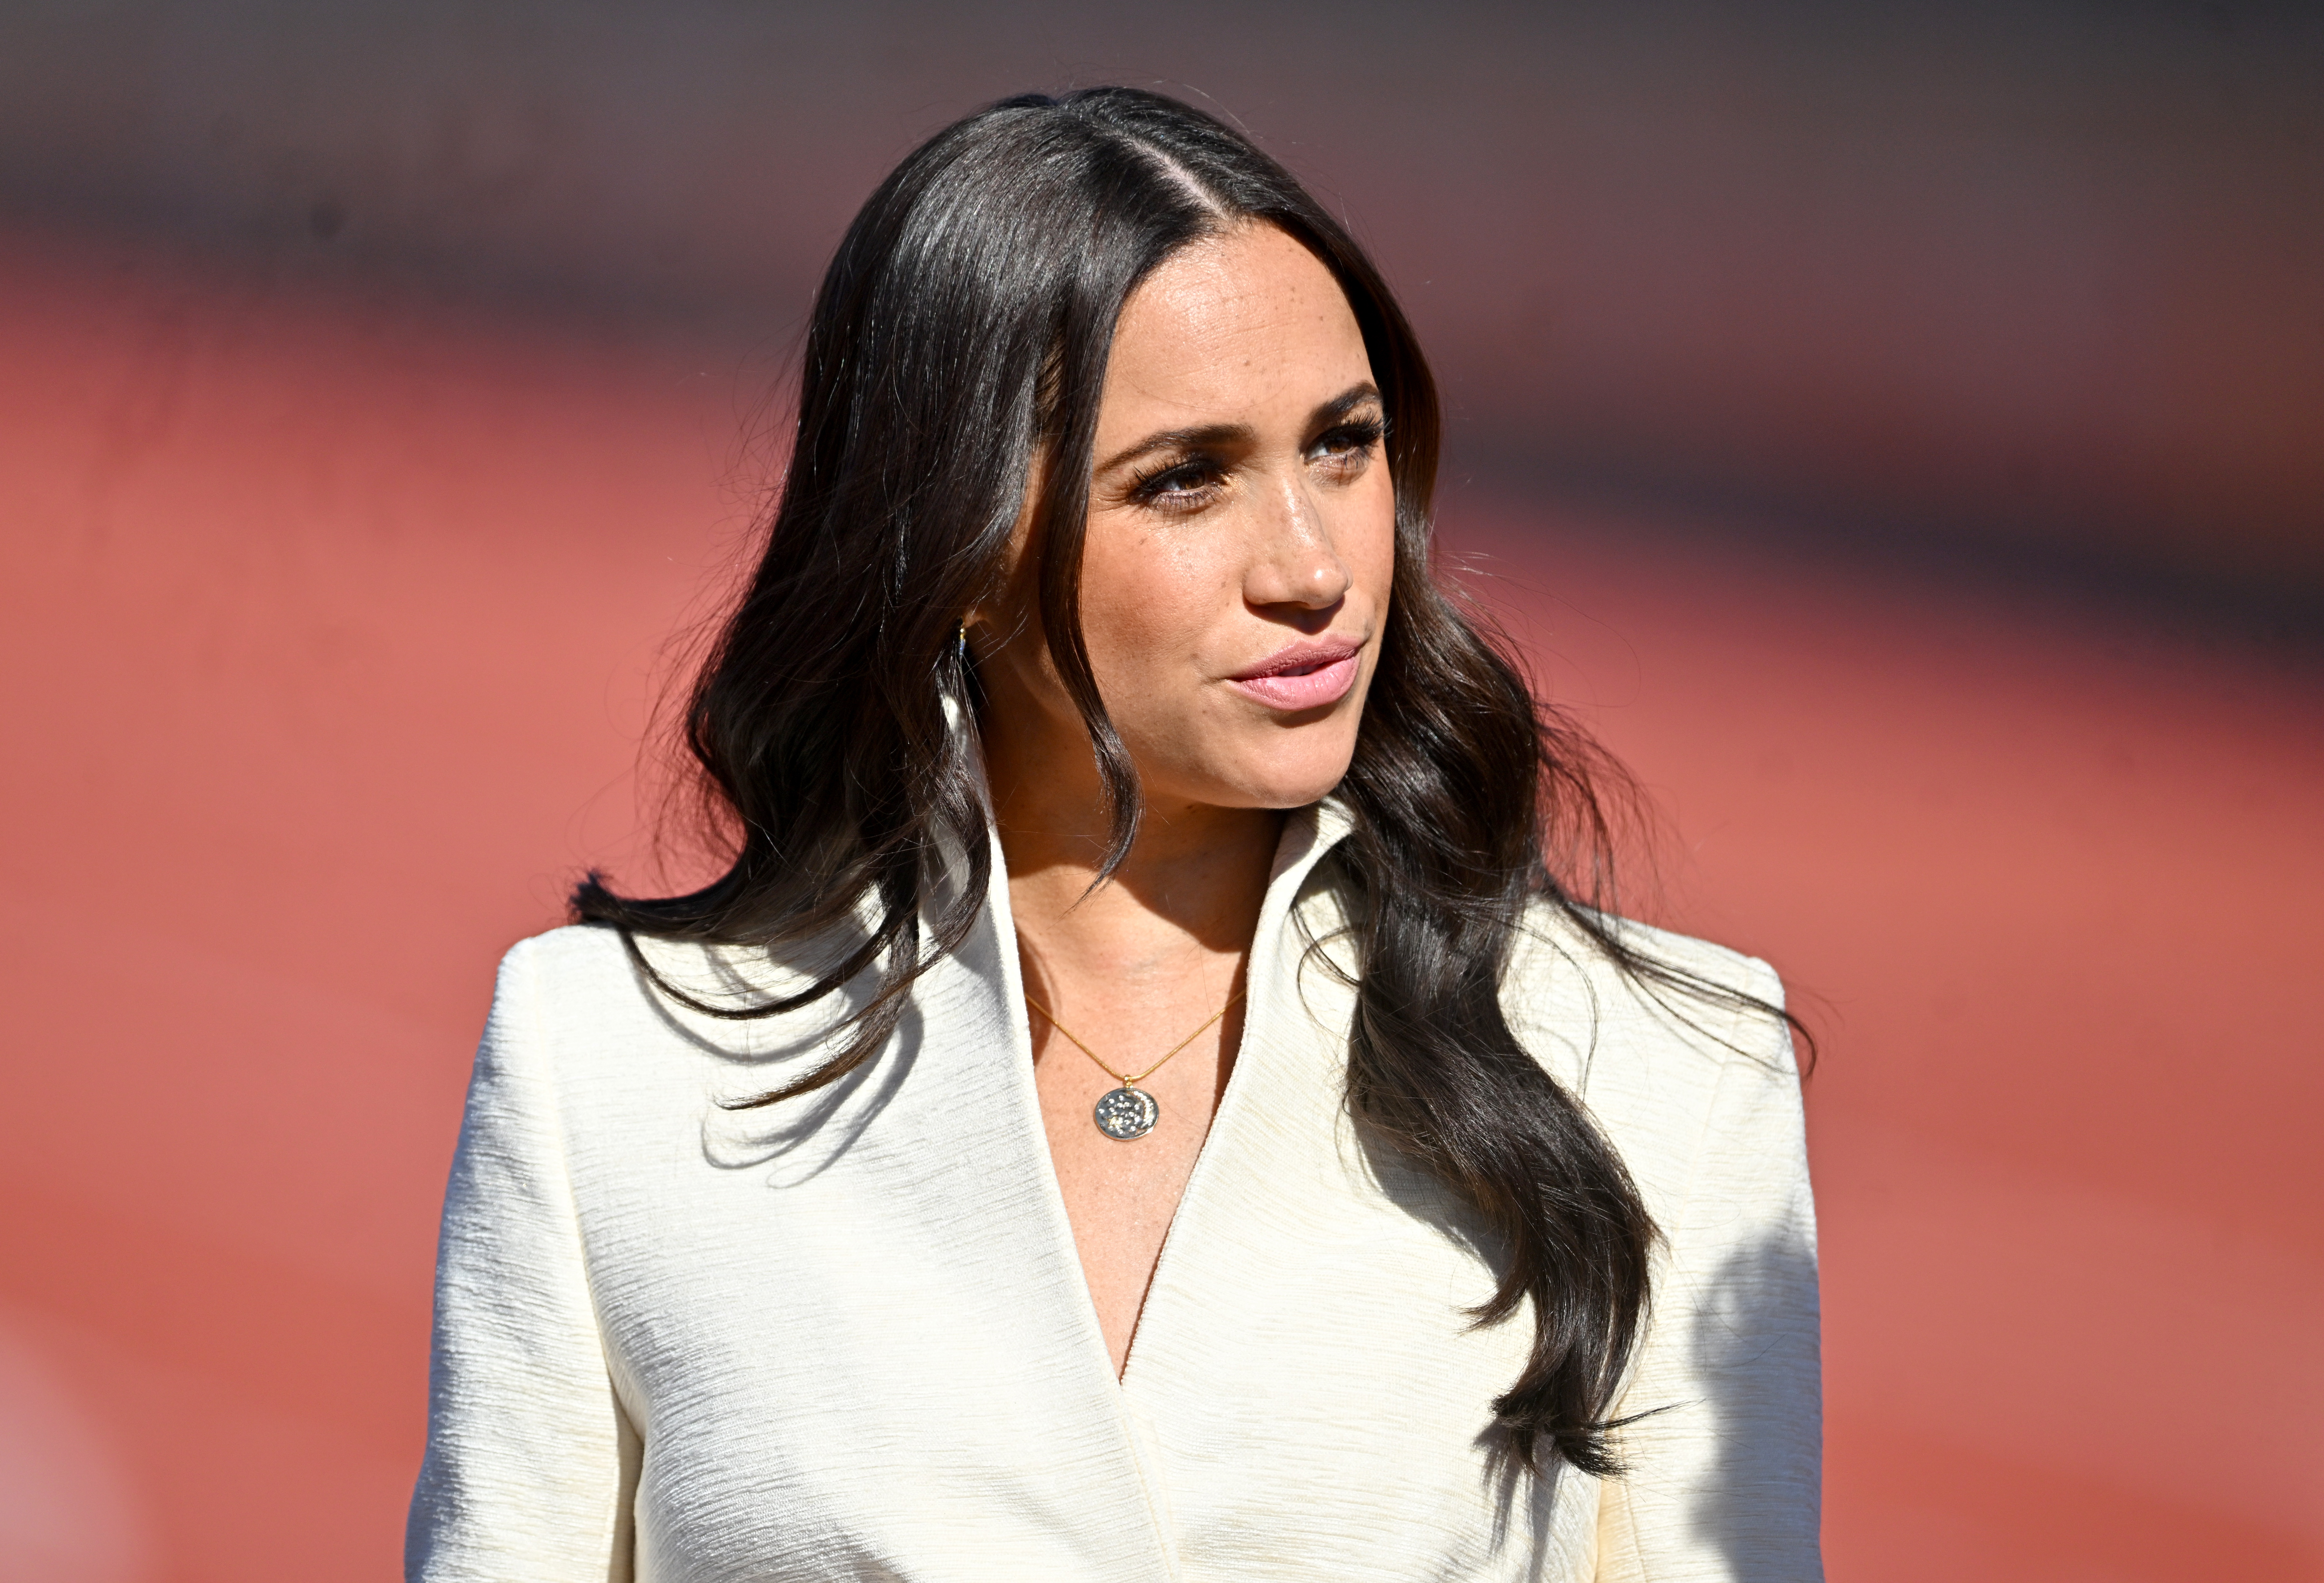 Meghan Markle attends day two of the Invictus Games 2020 at Zuiderpark on April 17, 2022 in The Hague, Netherlands | Source: Getty Images